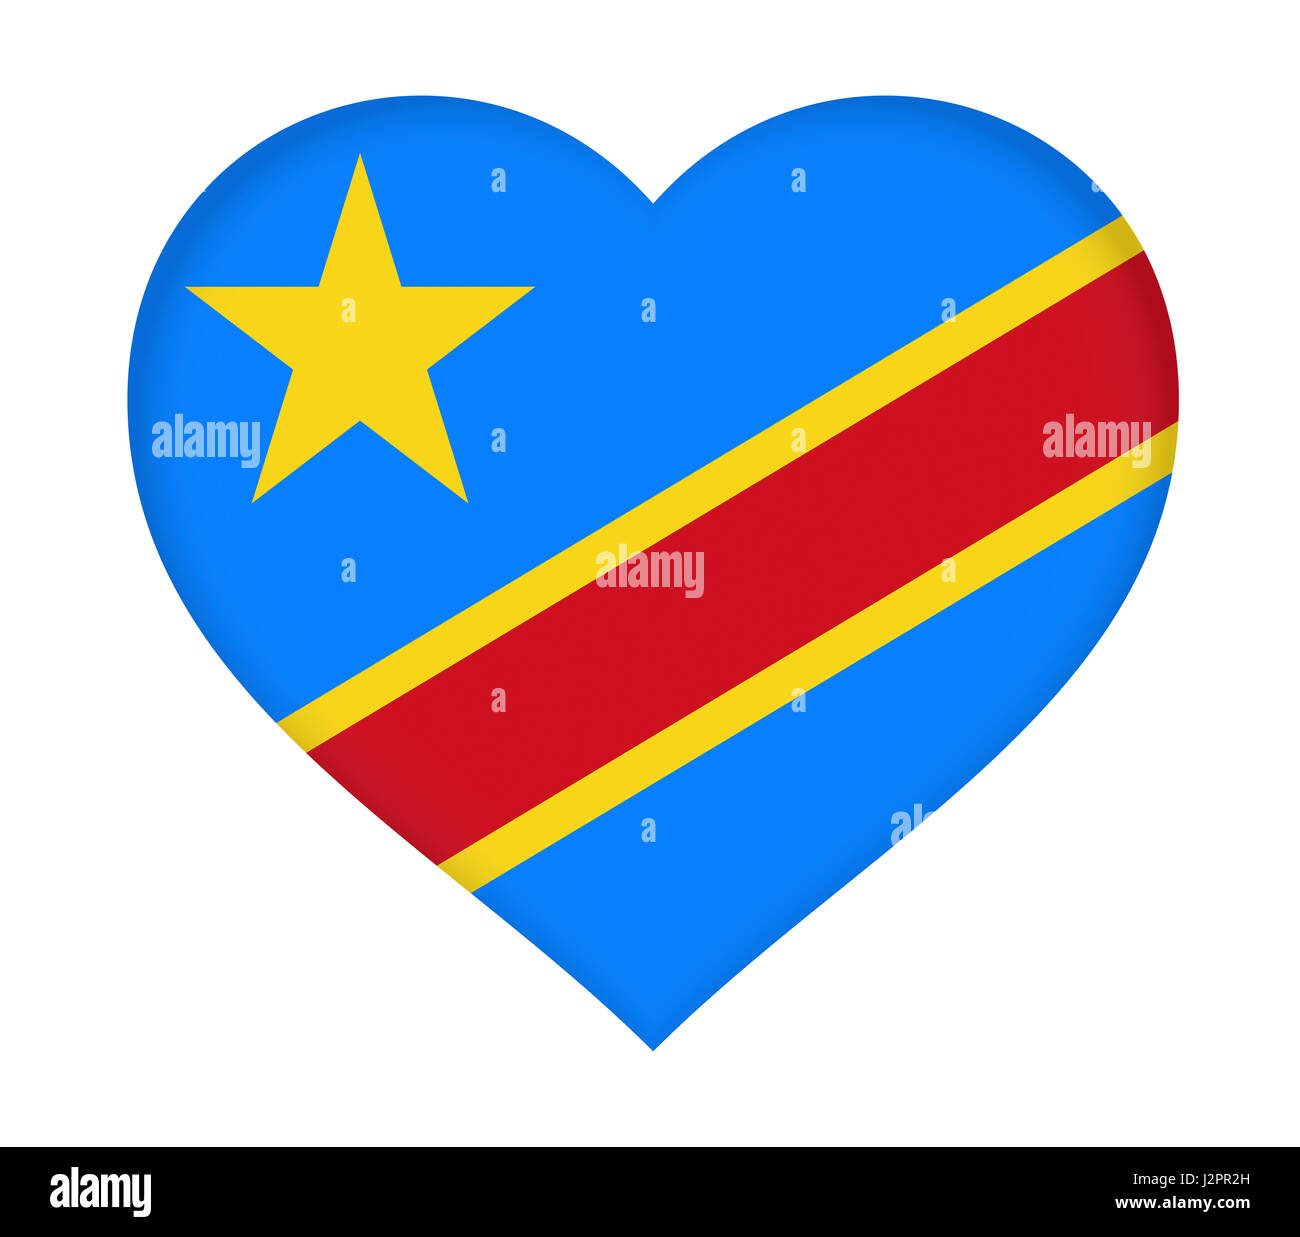 Country Democratic Republic Of The Congo Democratic Republic Of The Congo  Flag Vector Illustration Stock Illustration - Download Image Now - iStock